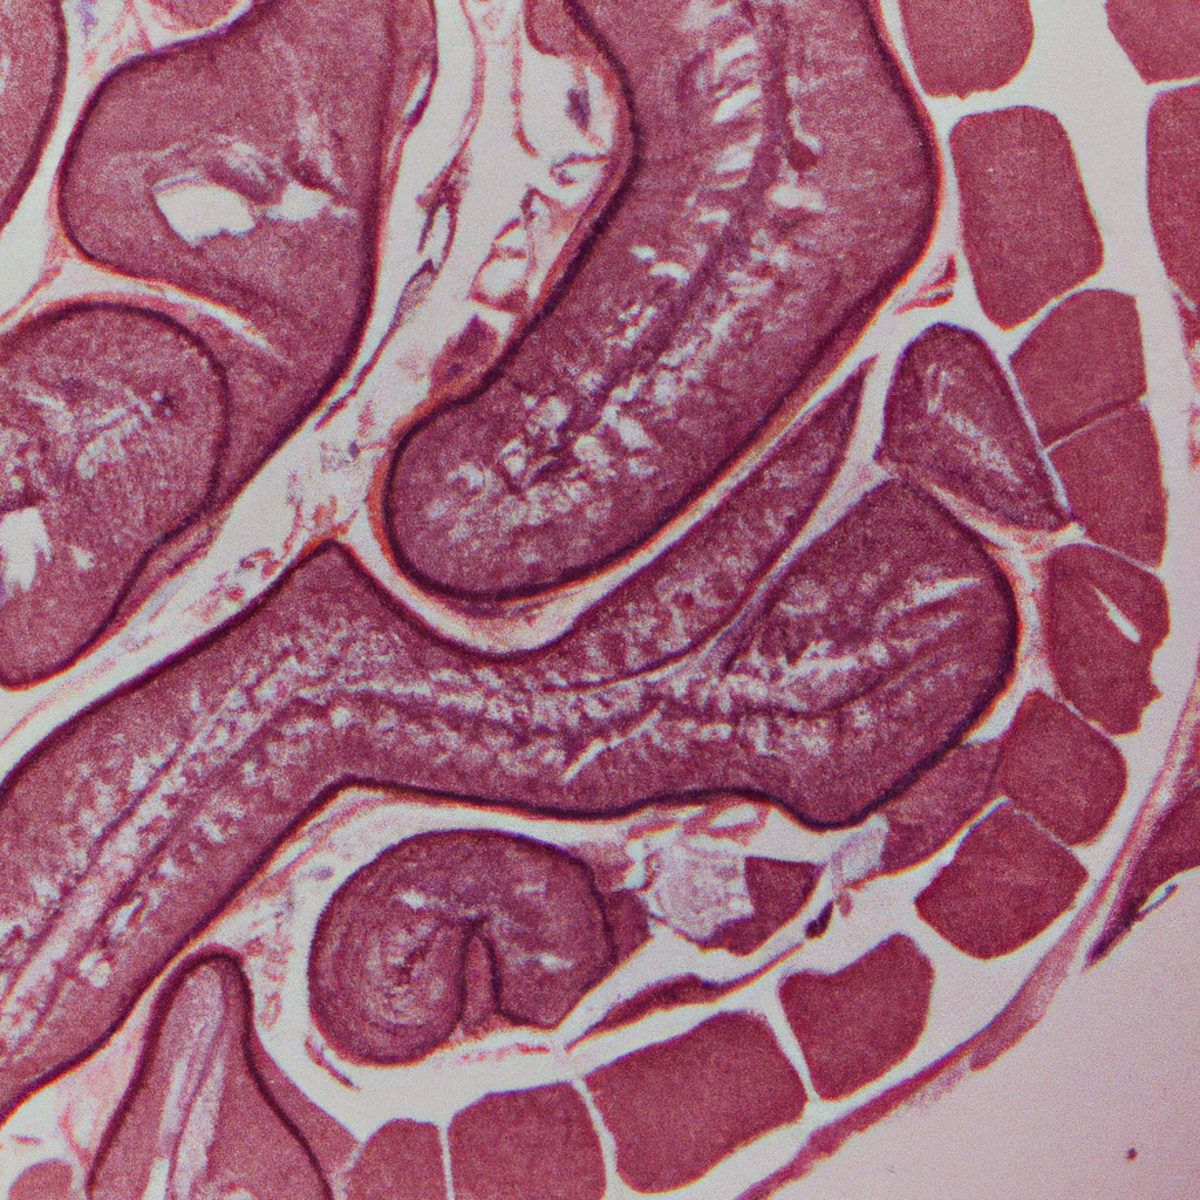 Close-up view of healthy spleen, showcasing intricate structure, vibrant colors, and sharp details of tissues and blood vessels.